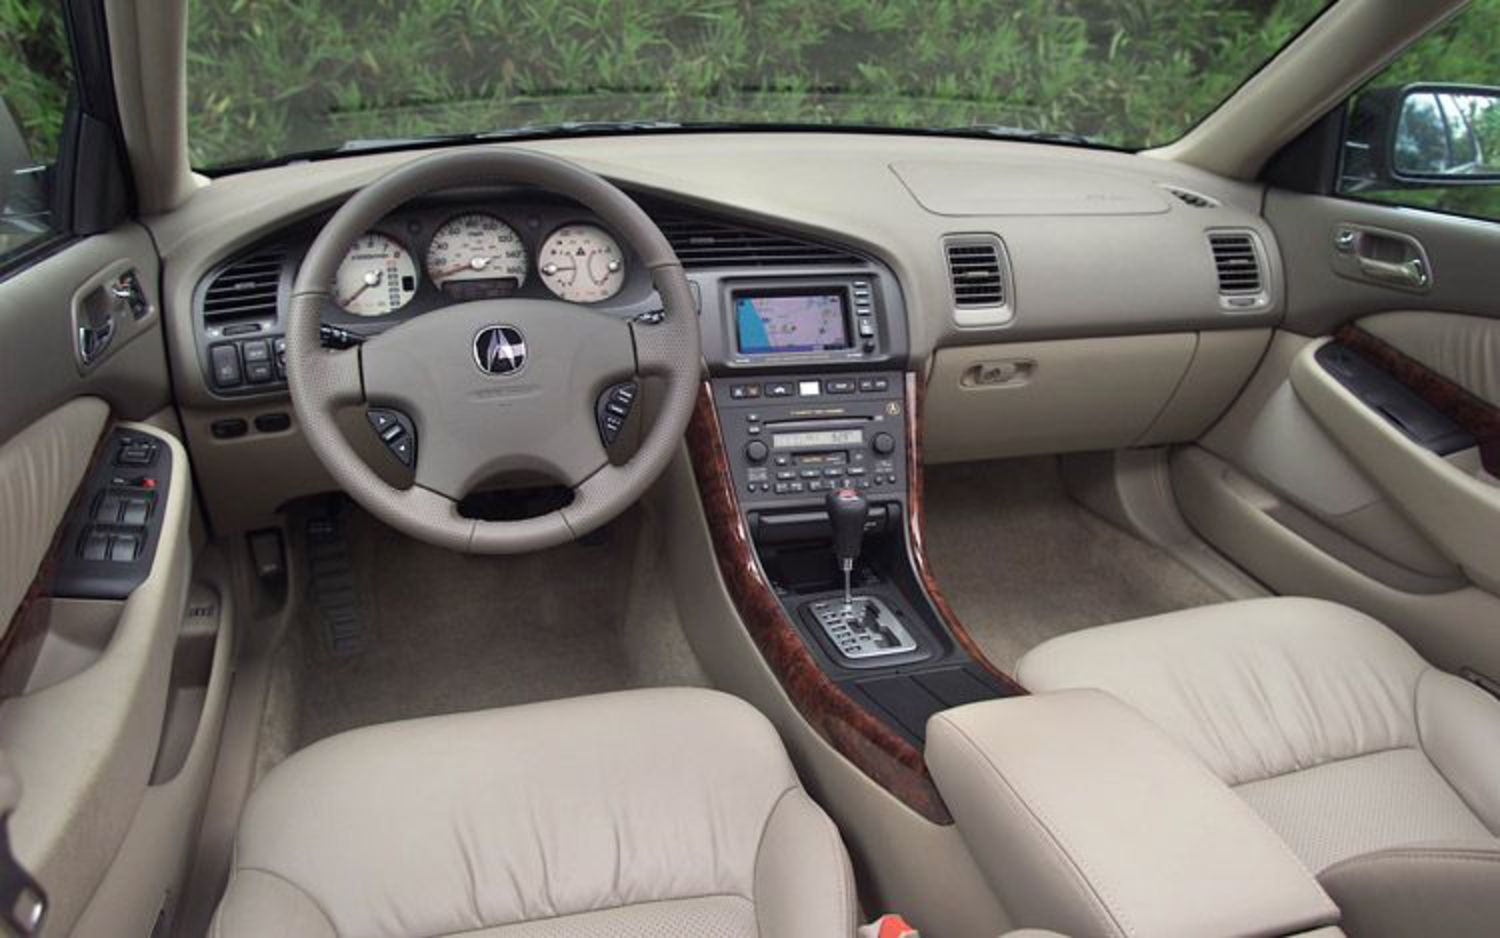 2003 Honda Accord EX-L V6 OR 2003 Acura TL Type S - Page 3 ...